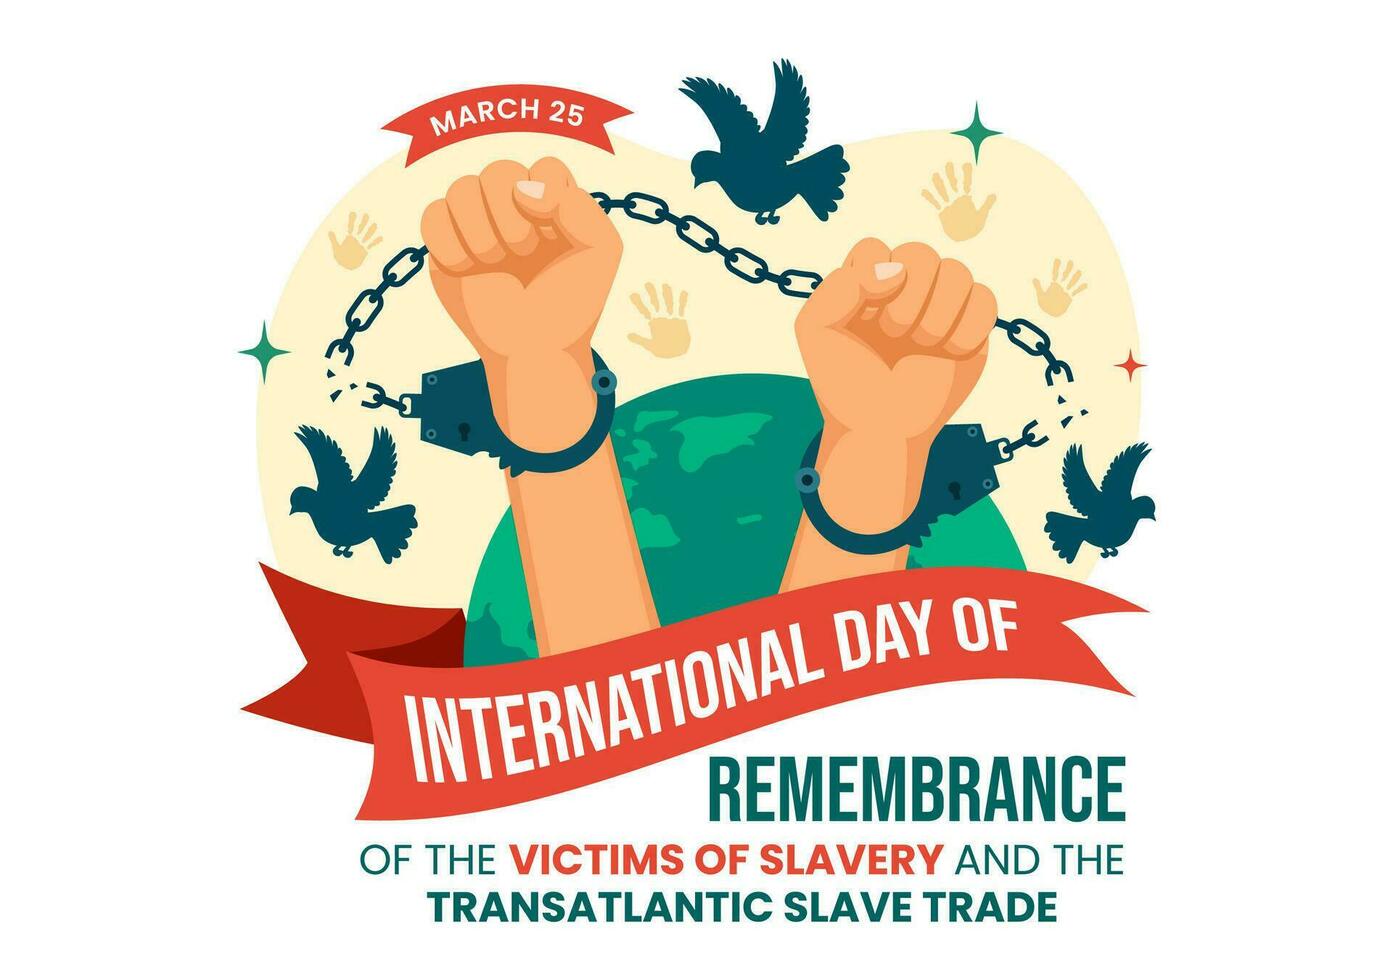 International Day of Remembrance of the Victims of Slavery and the Transatlantic Slave Vector Design Illustration to Against Trafficking in Persons